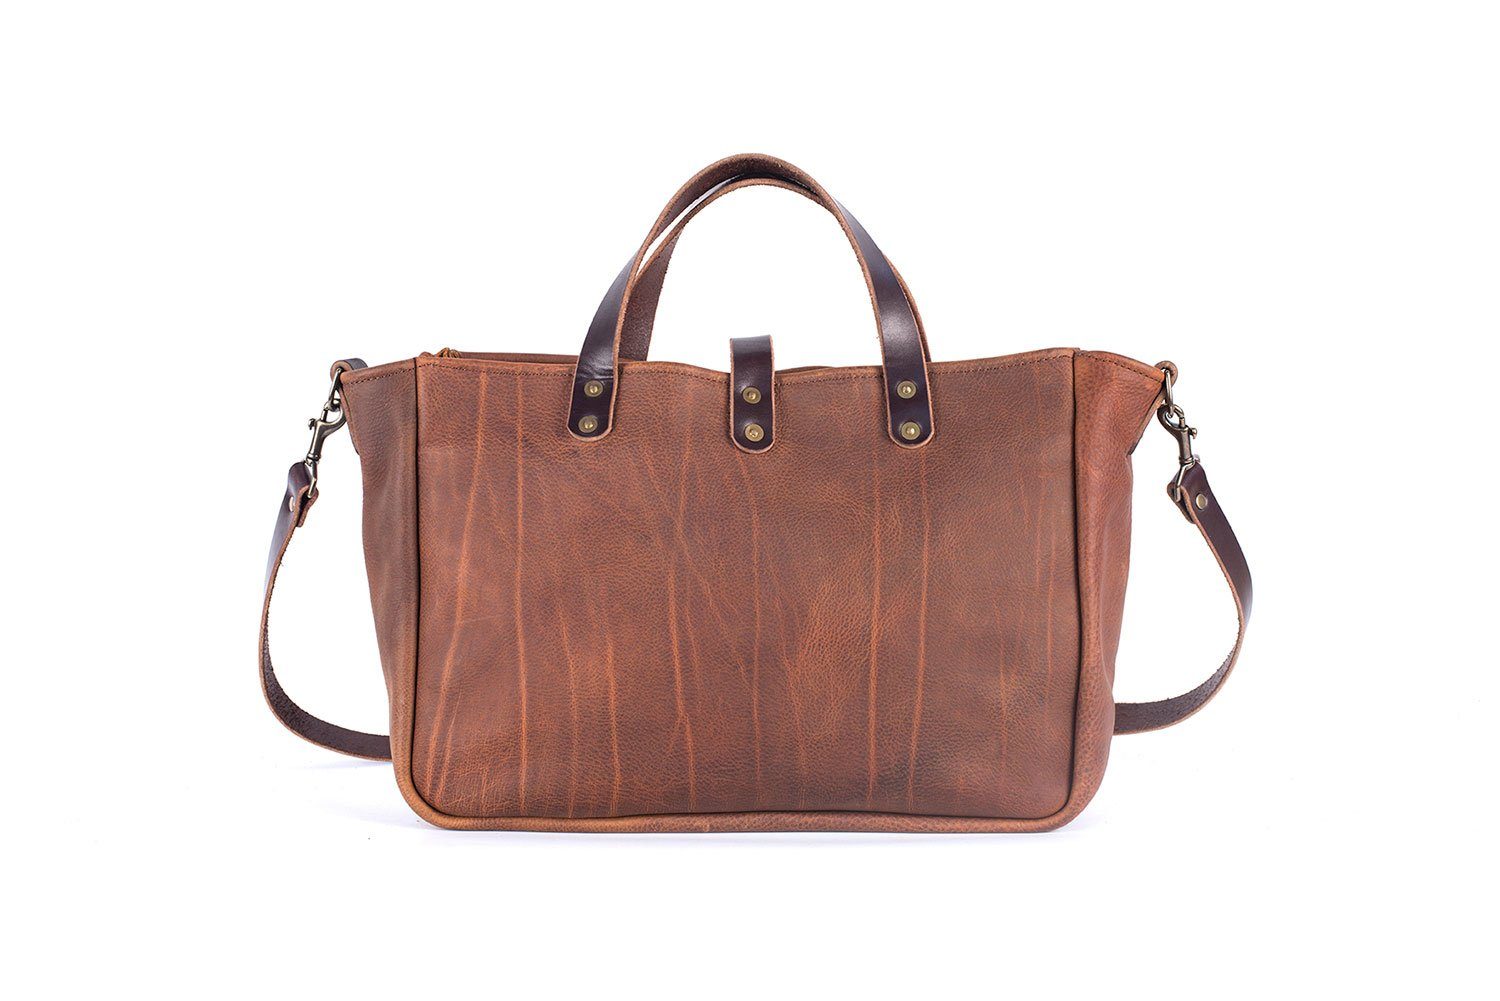 BUCHANAN LEATHER TOTE BAG / BRIEFCASE - Go Forth Goods